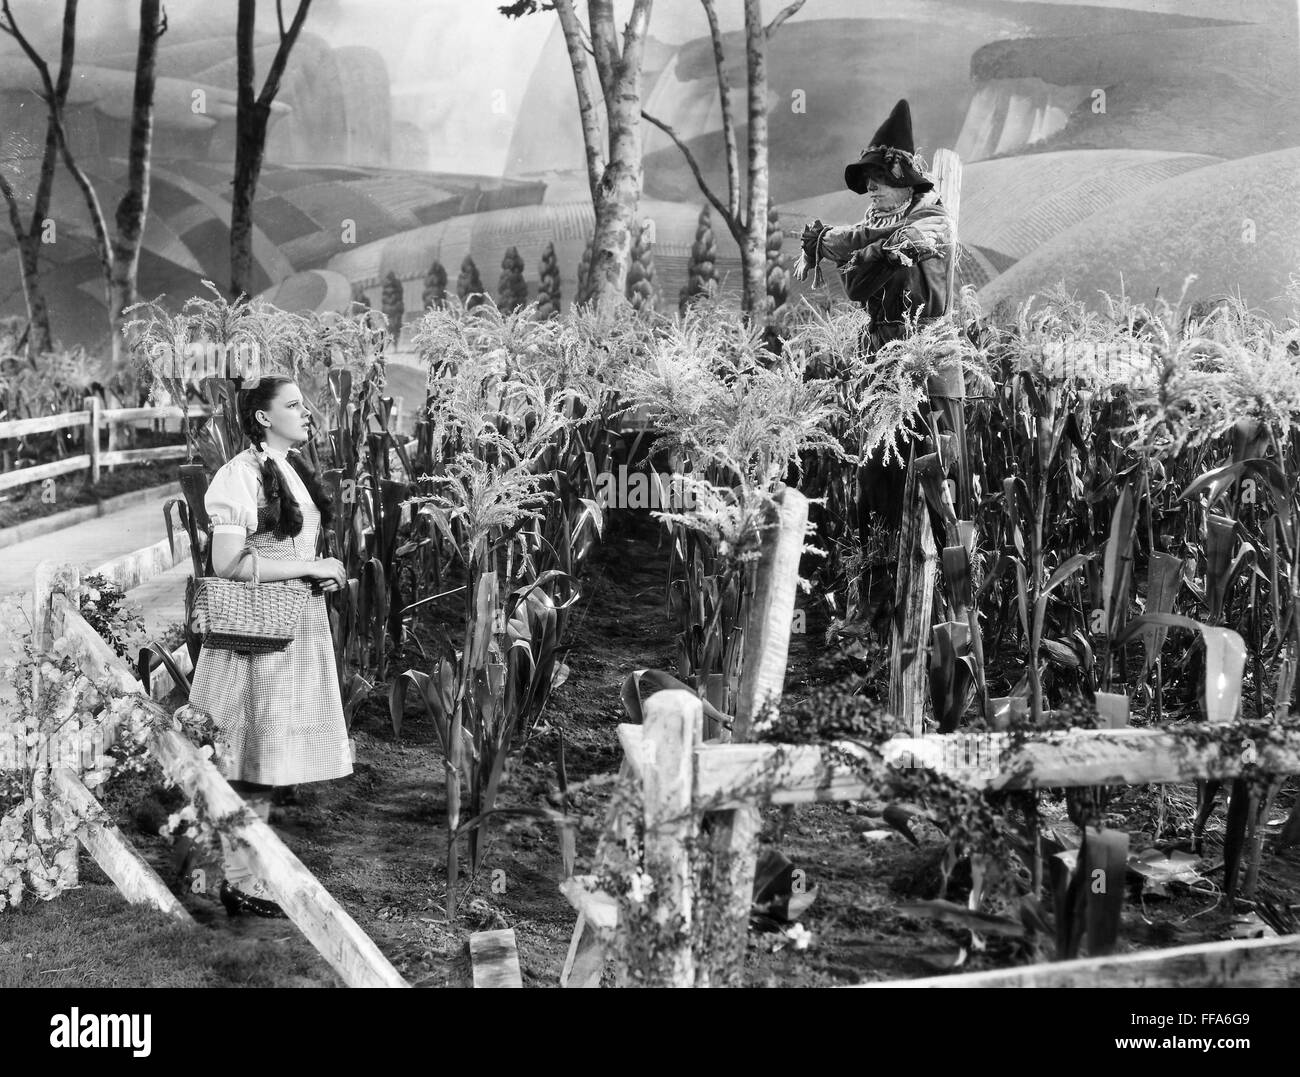 WIZARD OF OZ, 1939. /nJudy Garland as Dorothy and Ray Bolger as the Scarecrow. Stock Photo